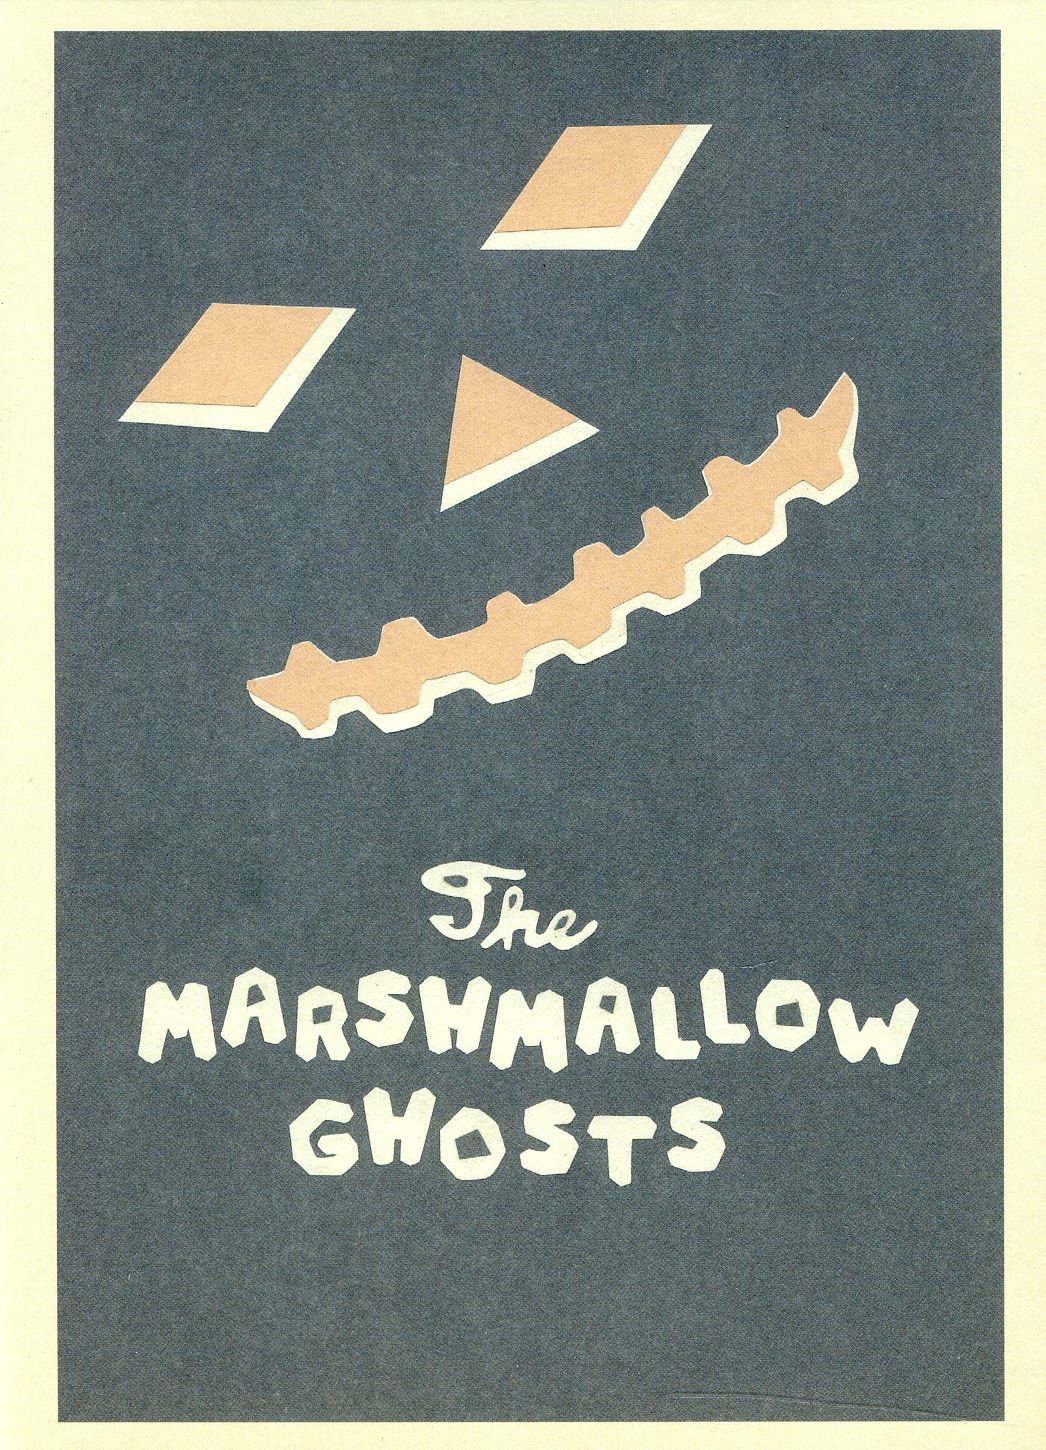 MARSHMALLOW GHOSTS